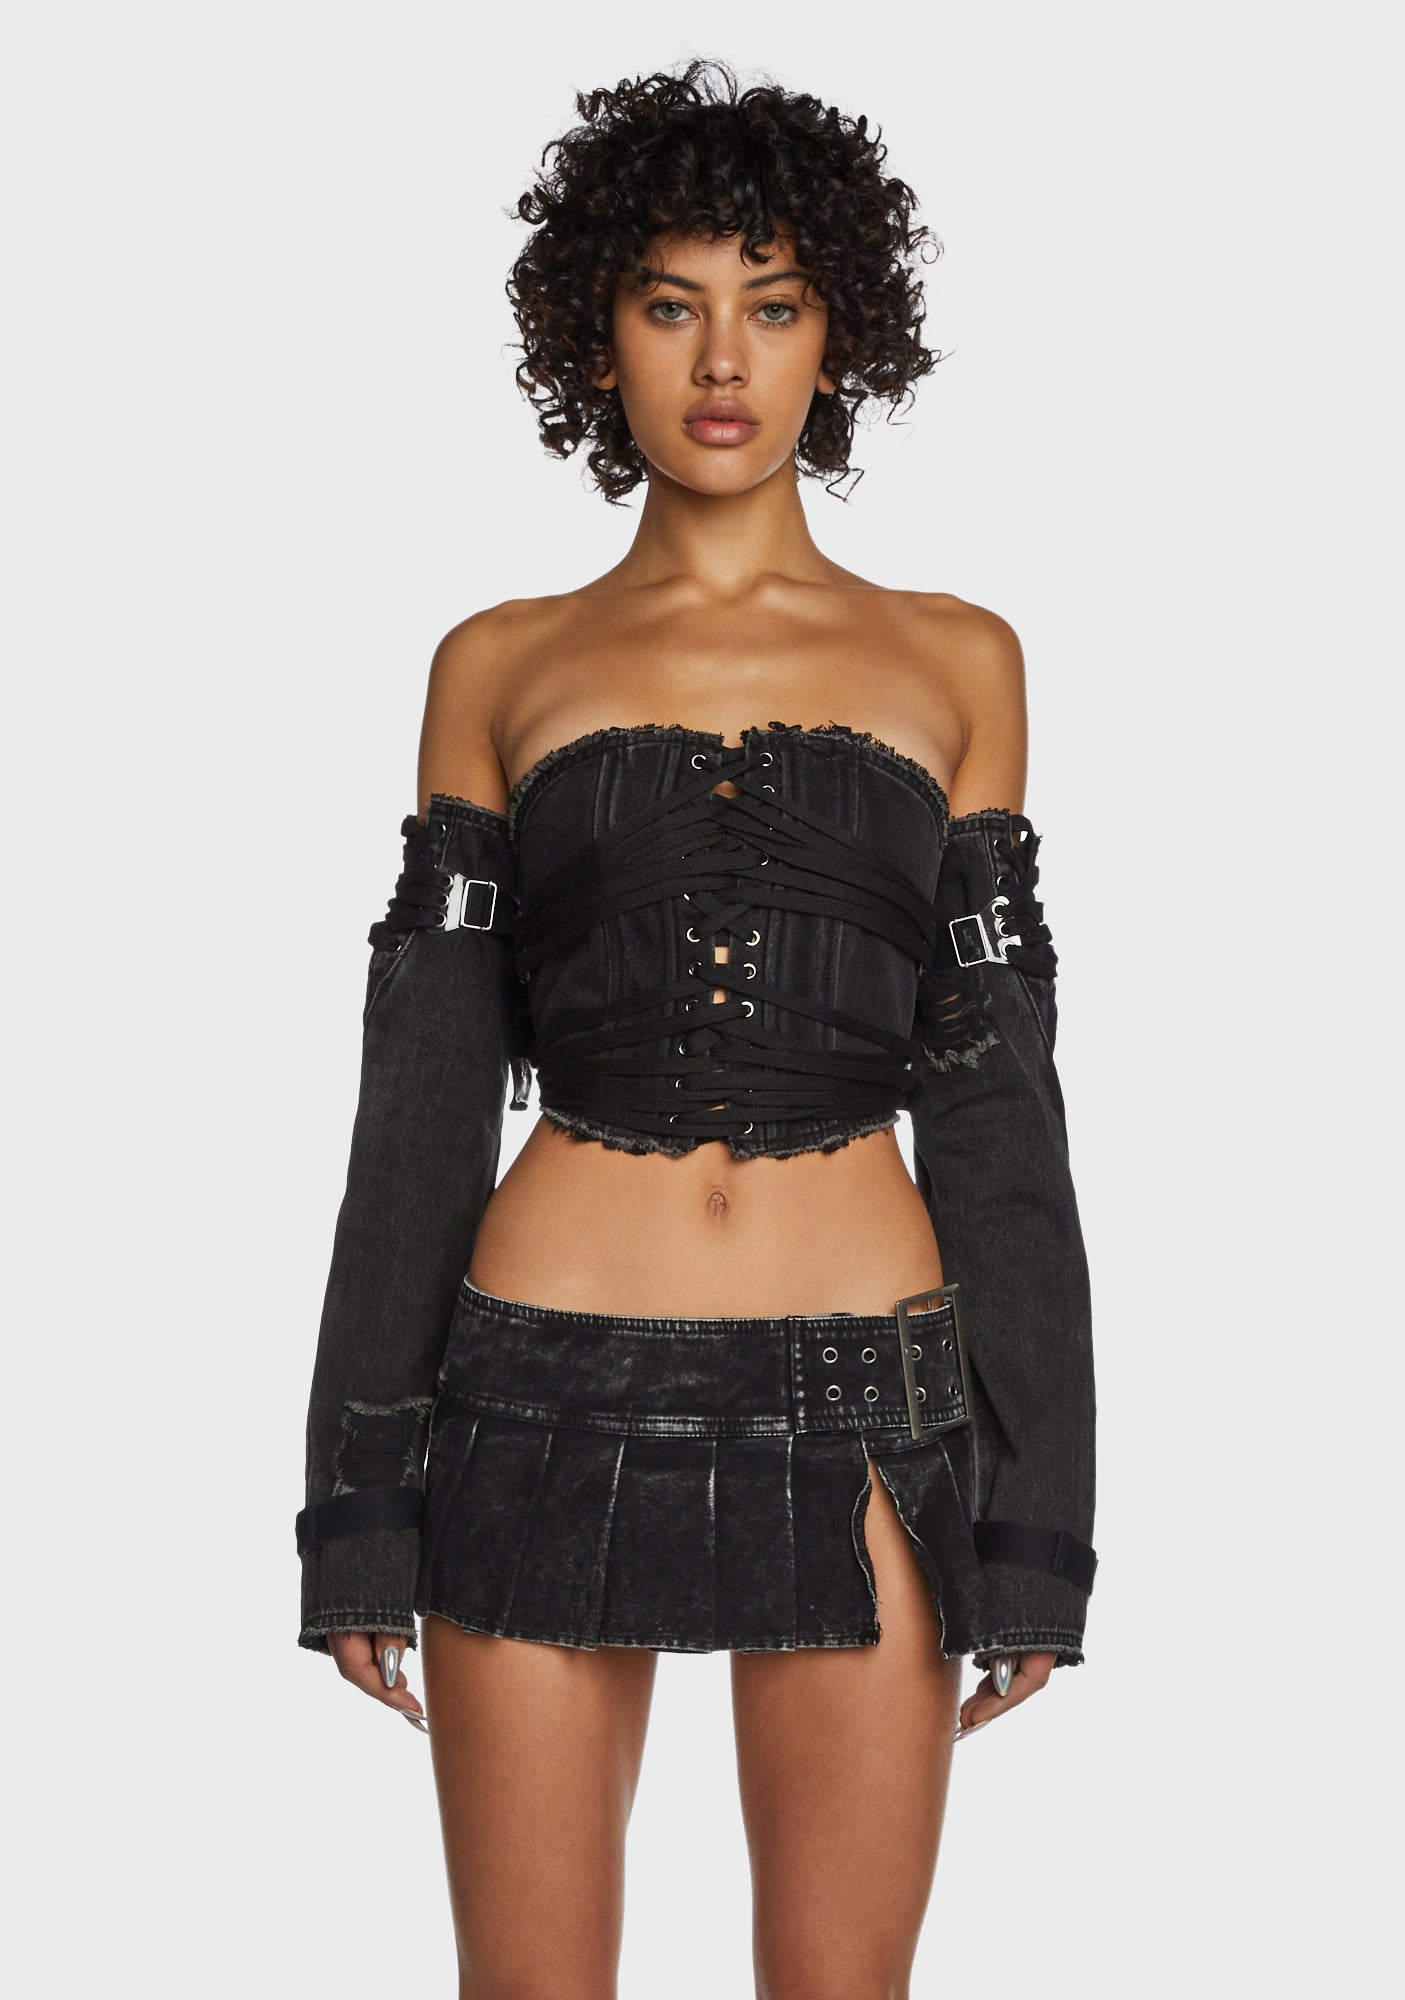 Replay Lace-Up Corset And Gloves Set - Black – Dolls Kill